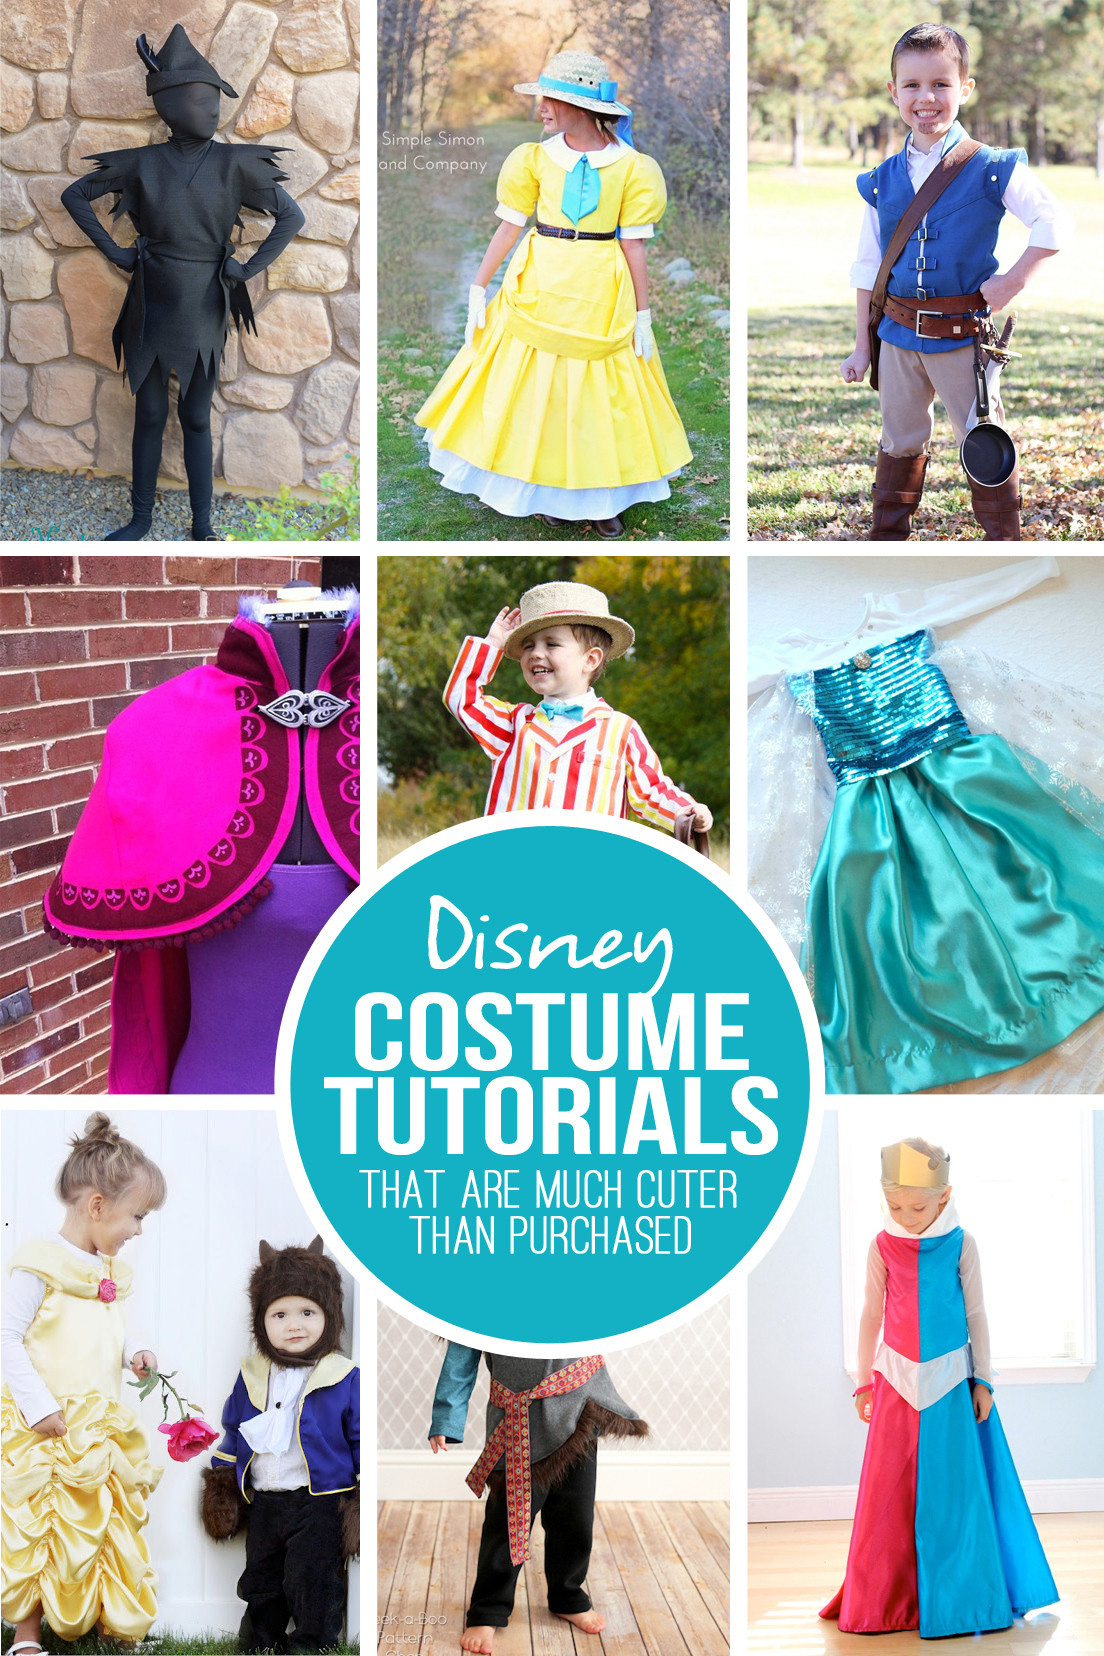 Disney Character Costume DIY
 28 DIY Disney Costume Tutorials at are MUCH cuter than